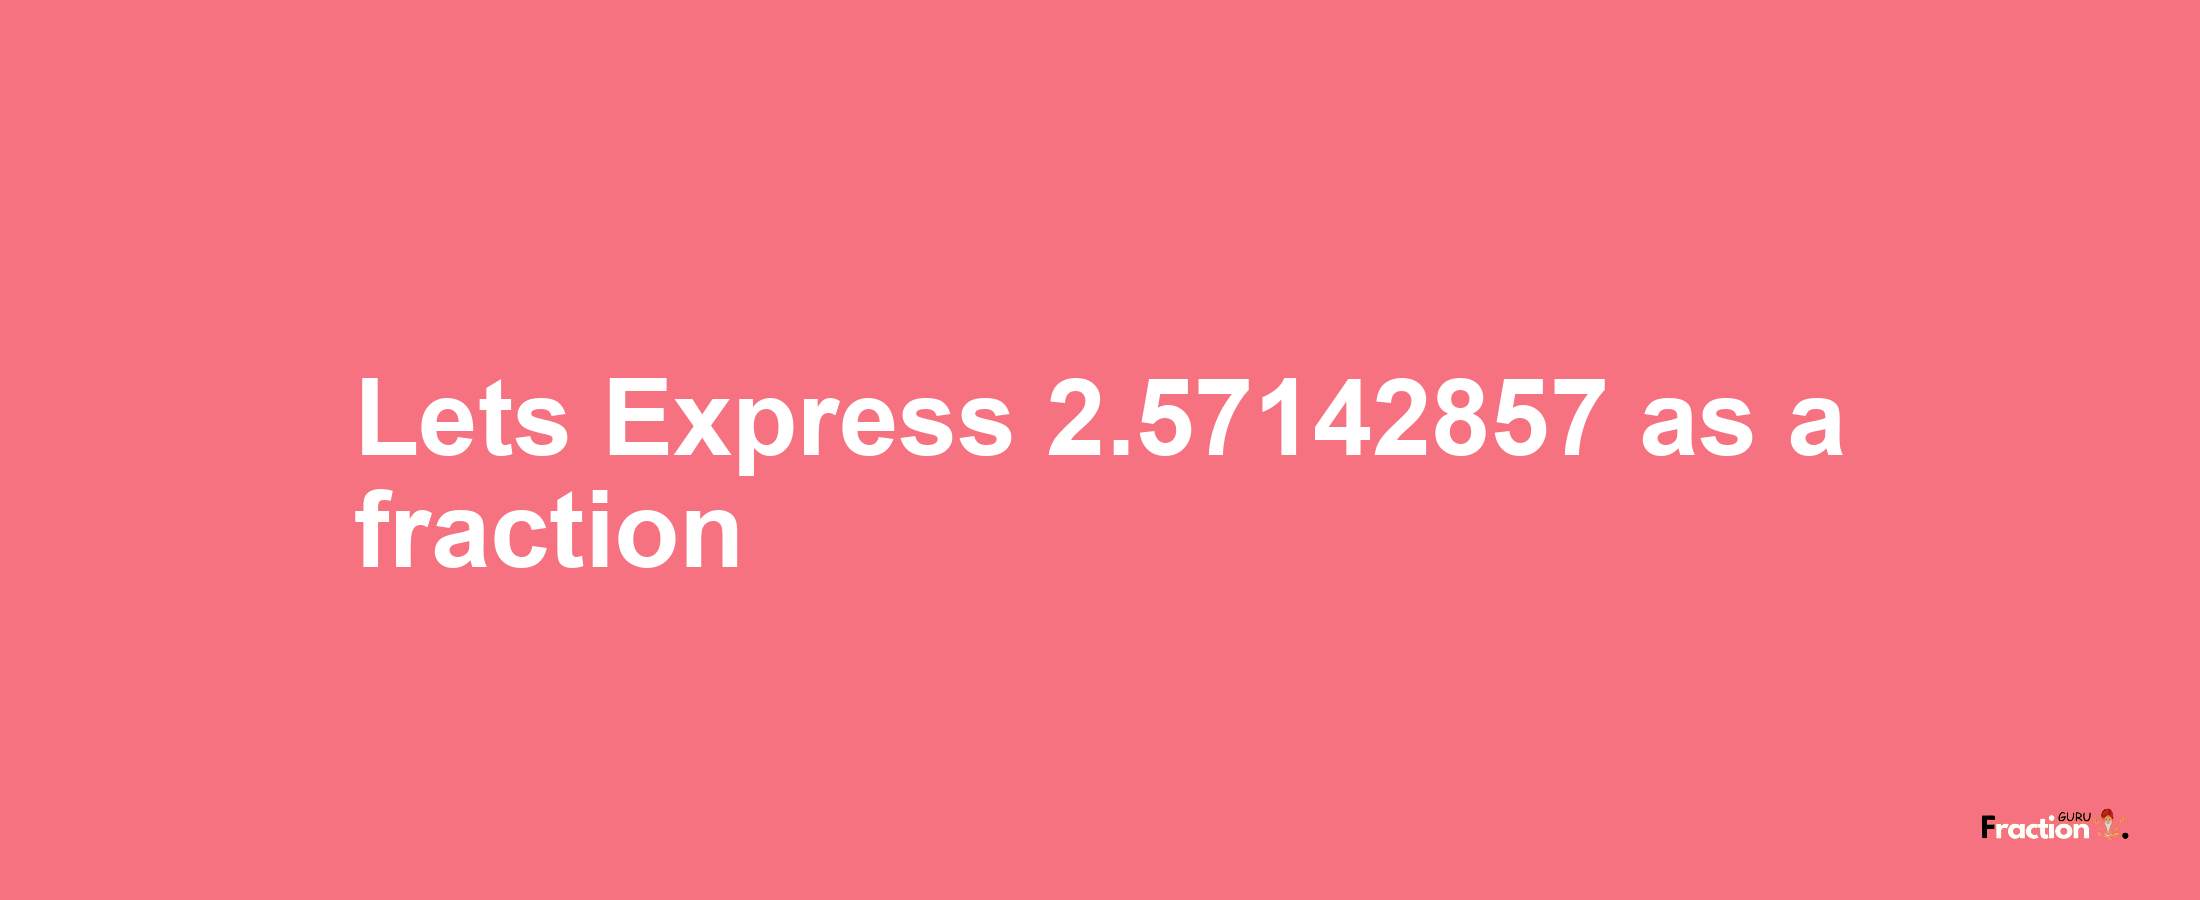 Lets Express 2.57142857 as afraction